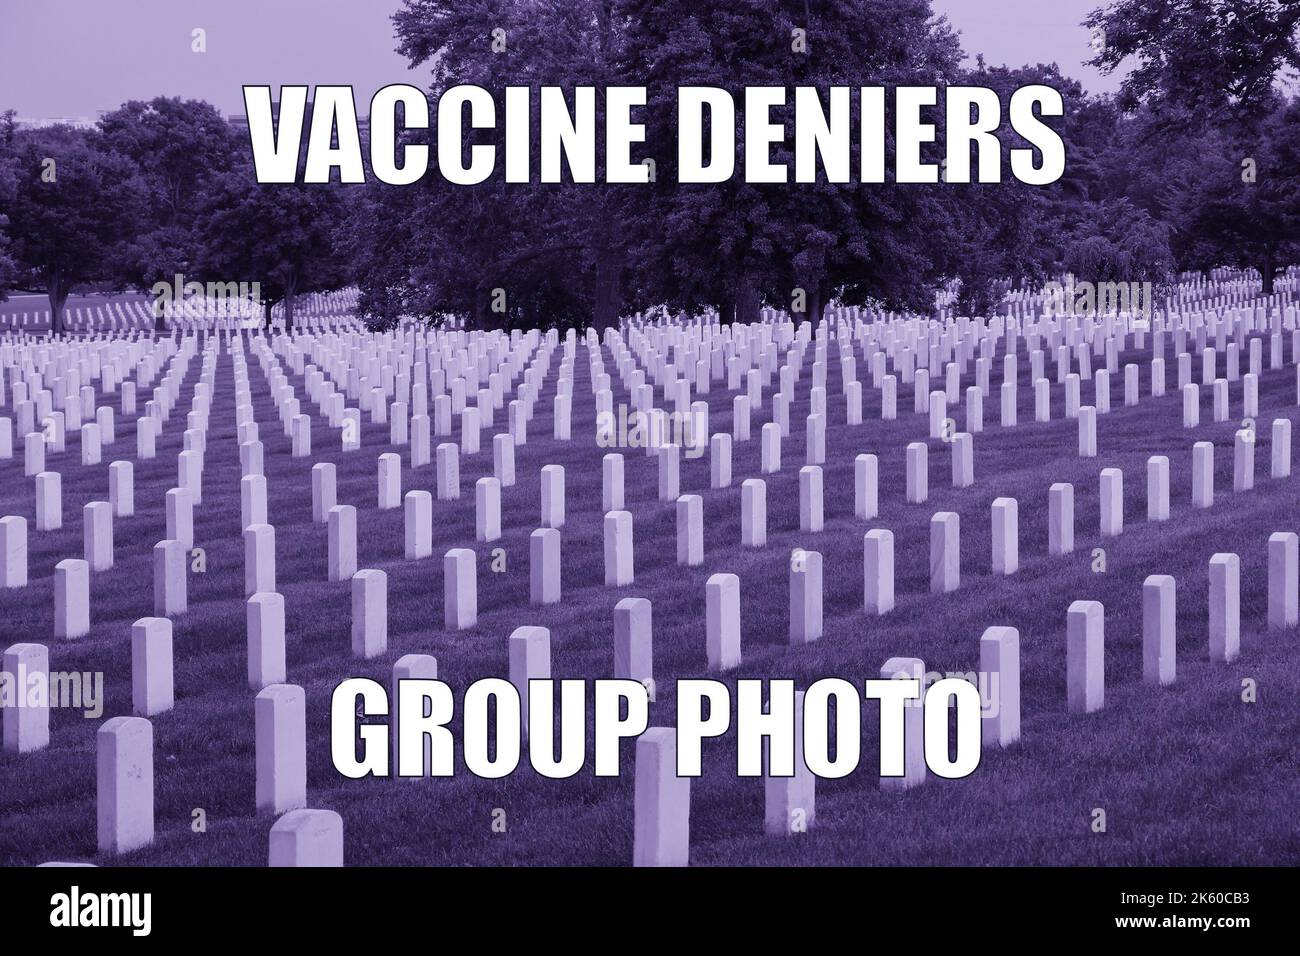 Vaccine deniers cemetery dark humor funny meme for social media sharing. Black humor about vaccine scepticism and anti-vaxxer conspiracy theorists. Stock Photo